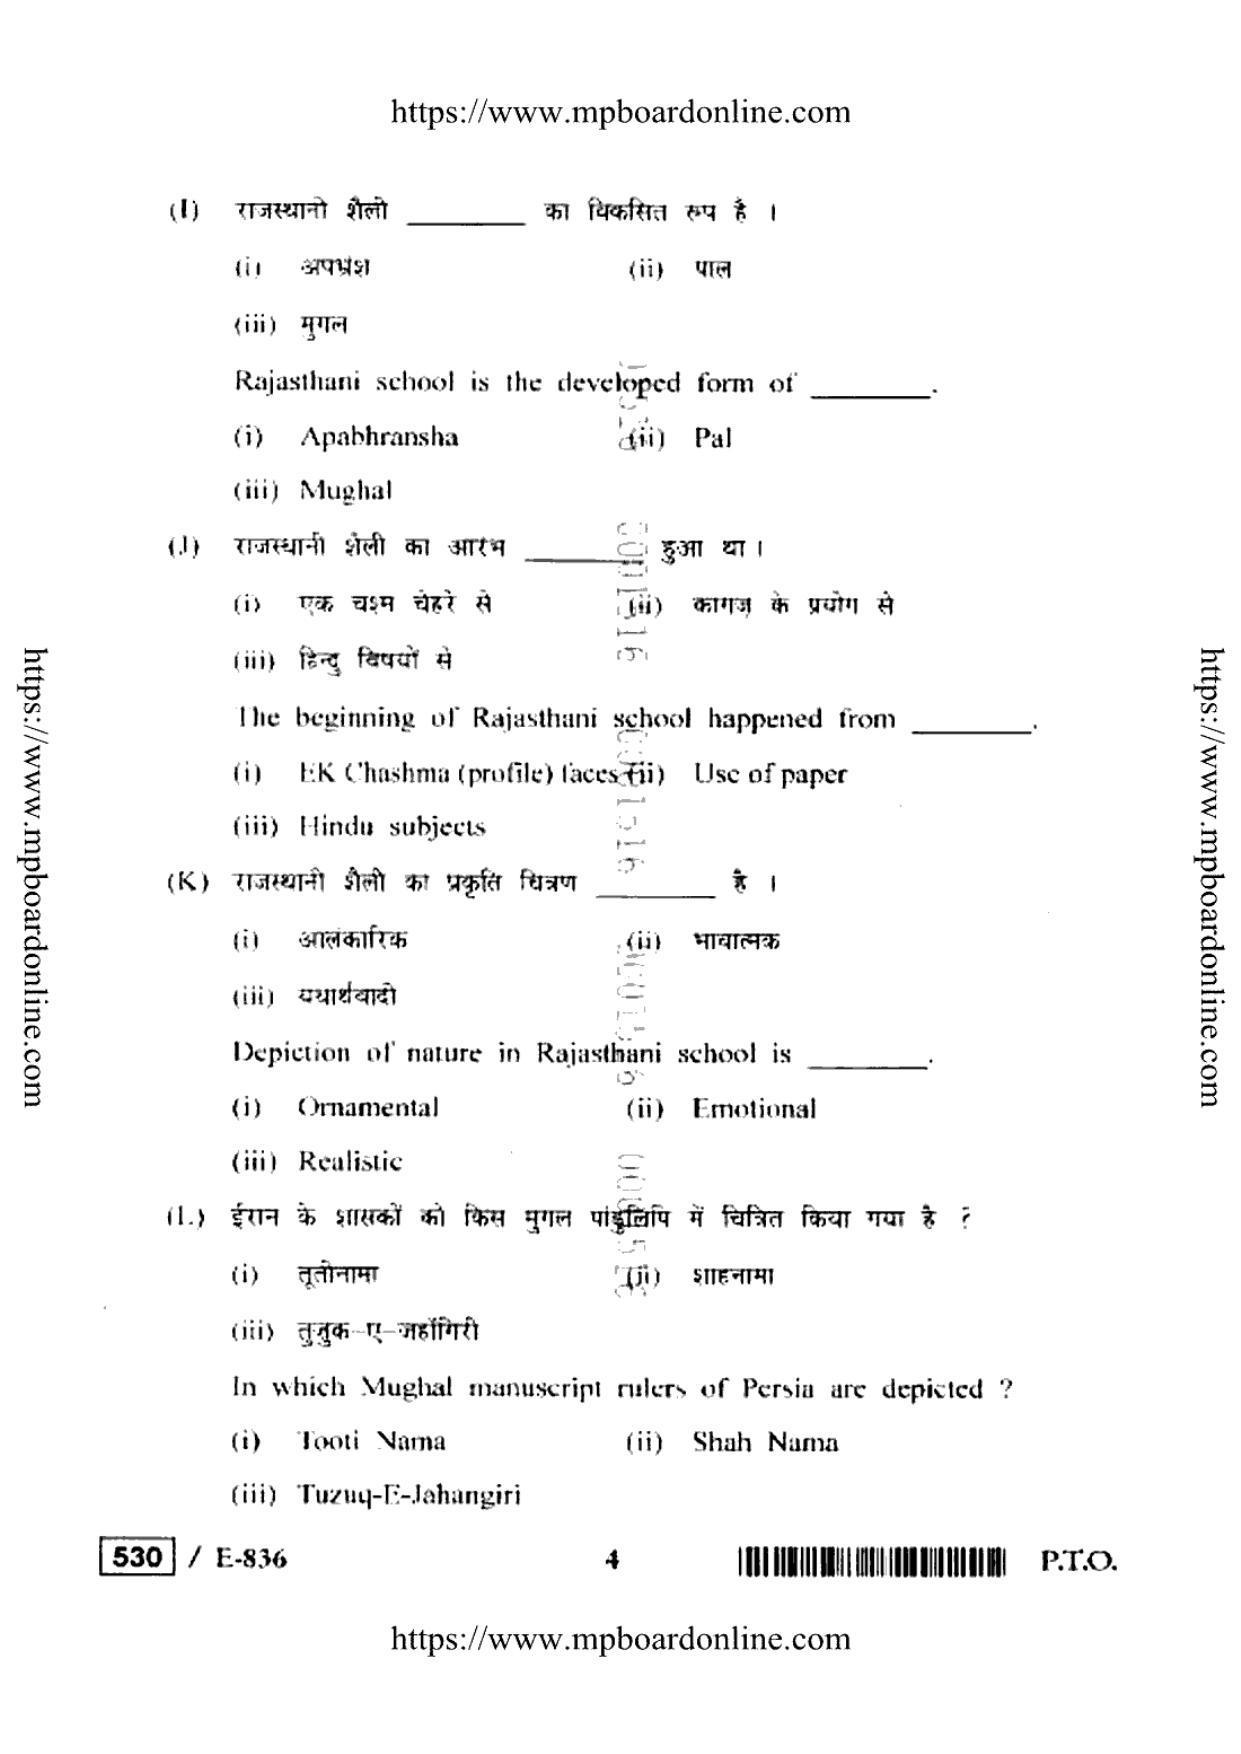 MP Board Class 12 History Of Indian Art 2020 Question Paper - Page 4